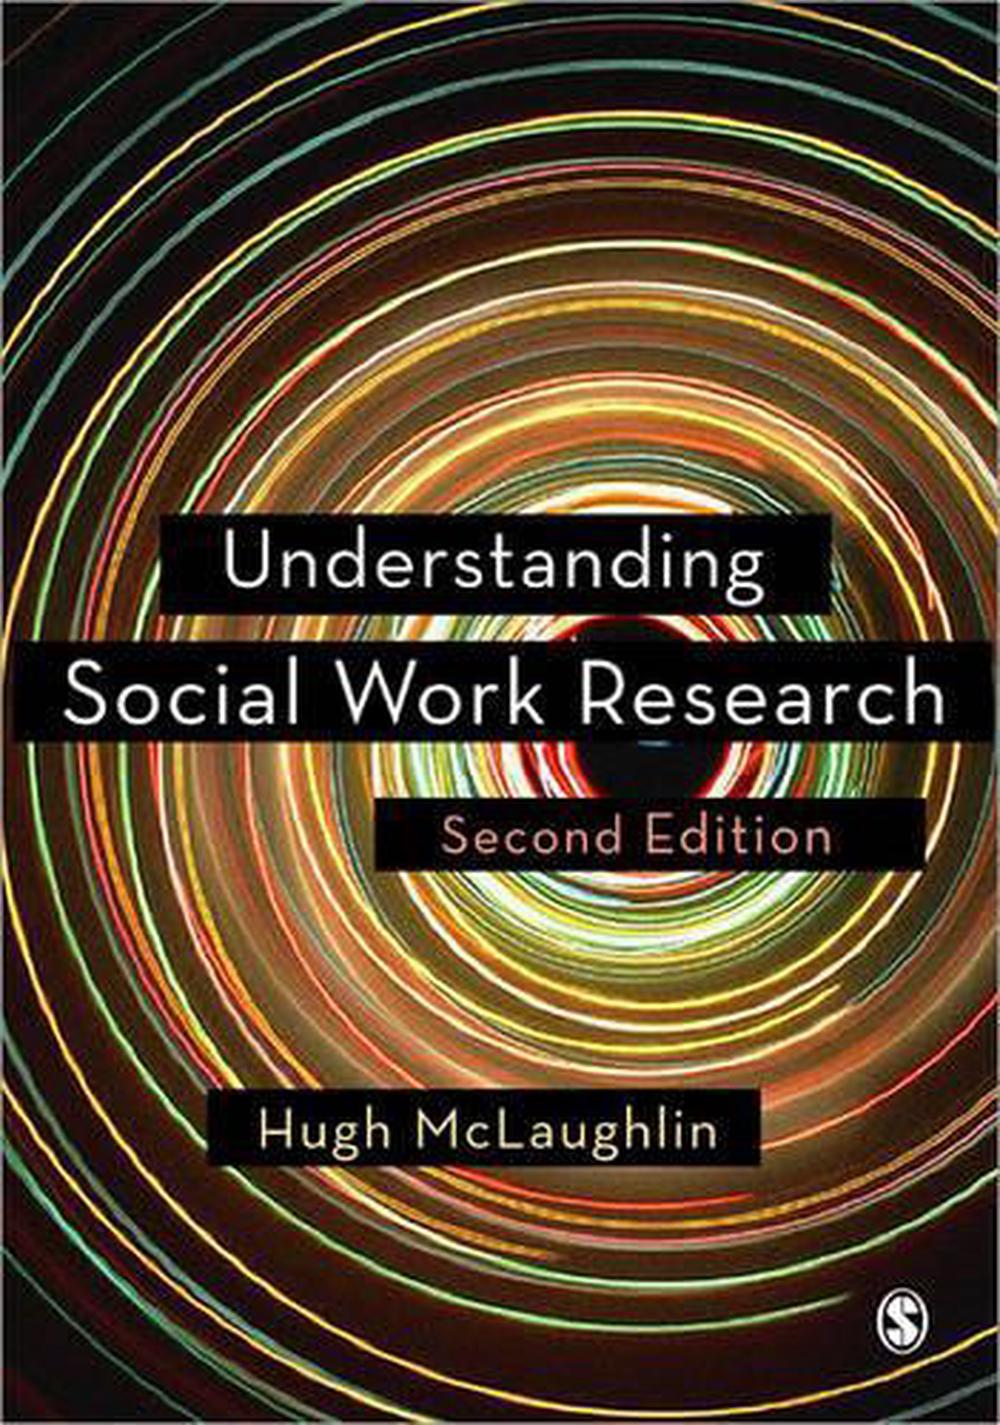 social work research study guide